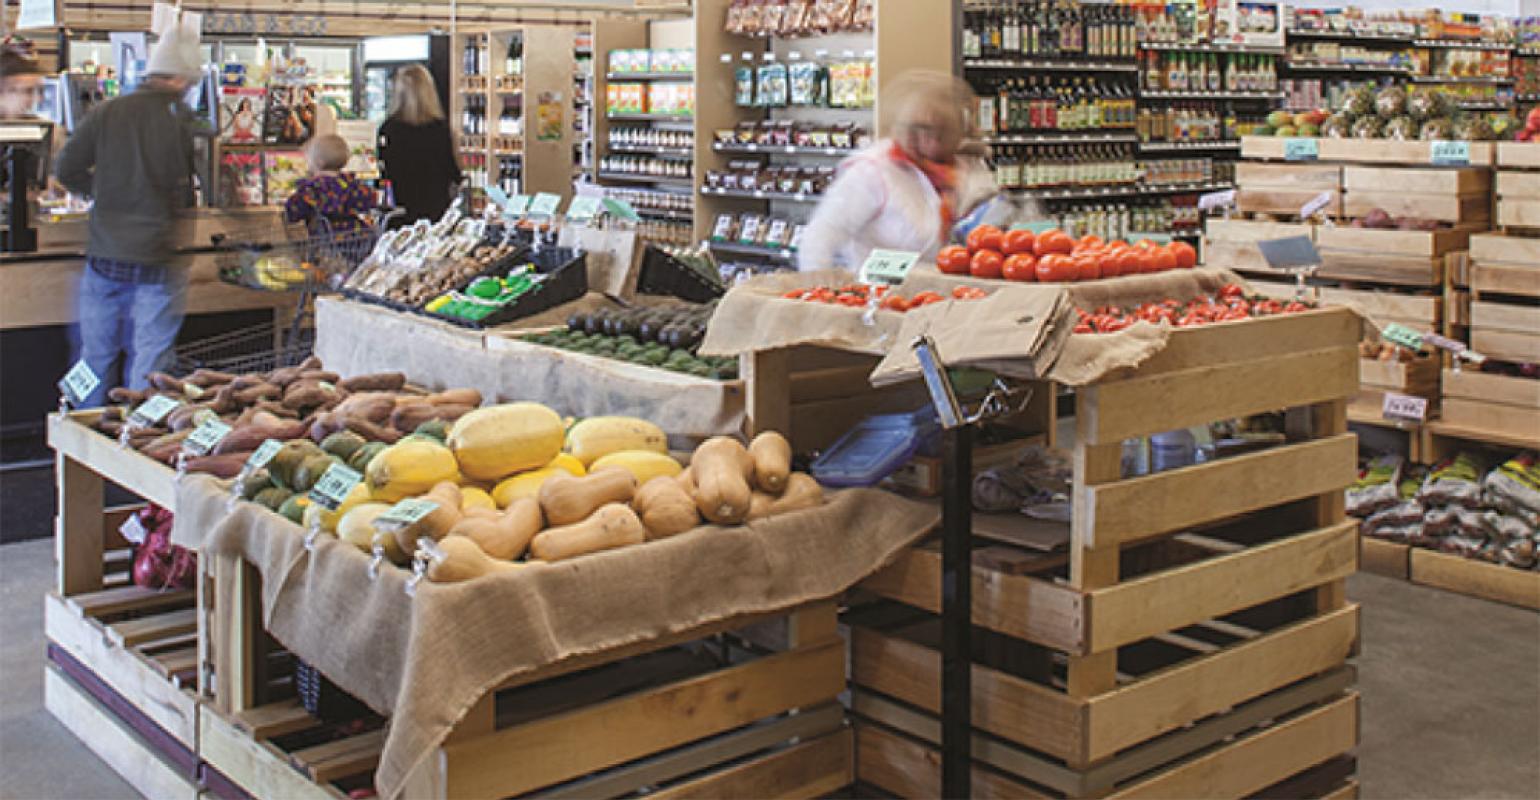 Retailers Find Fresh Solutions For Their Most Challenging Categories Supermarket News